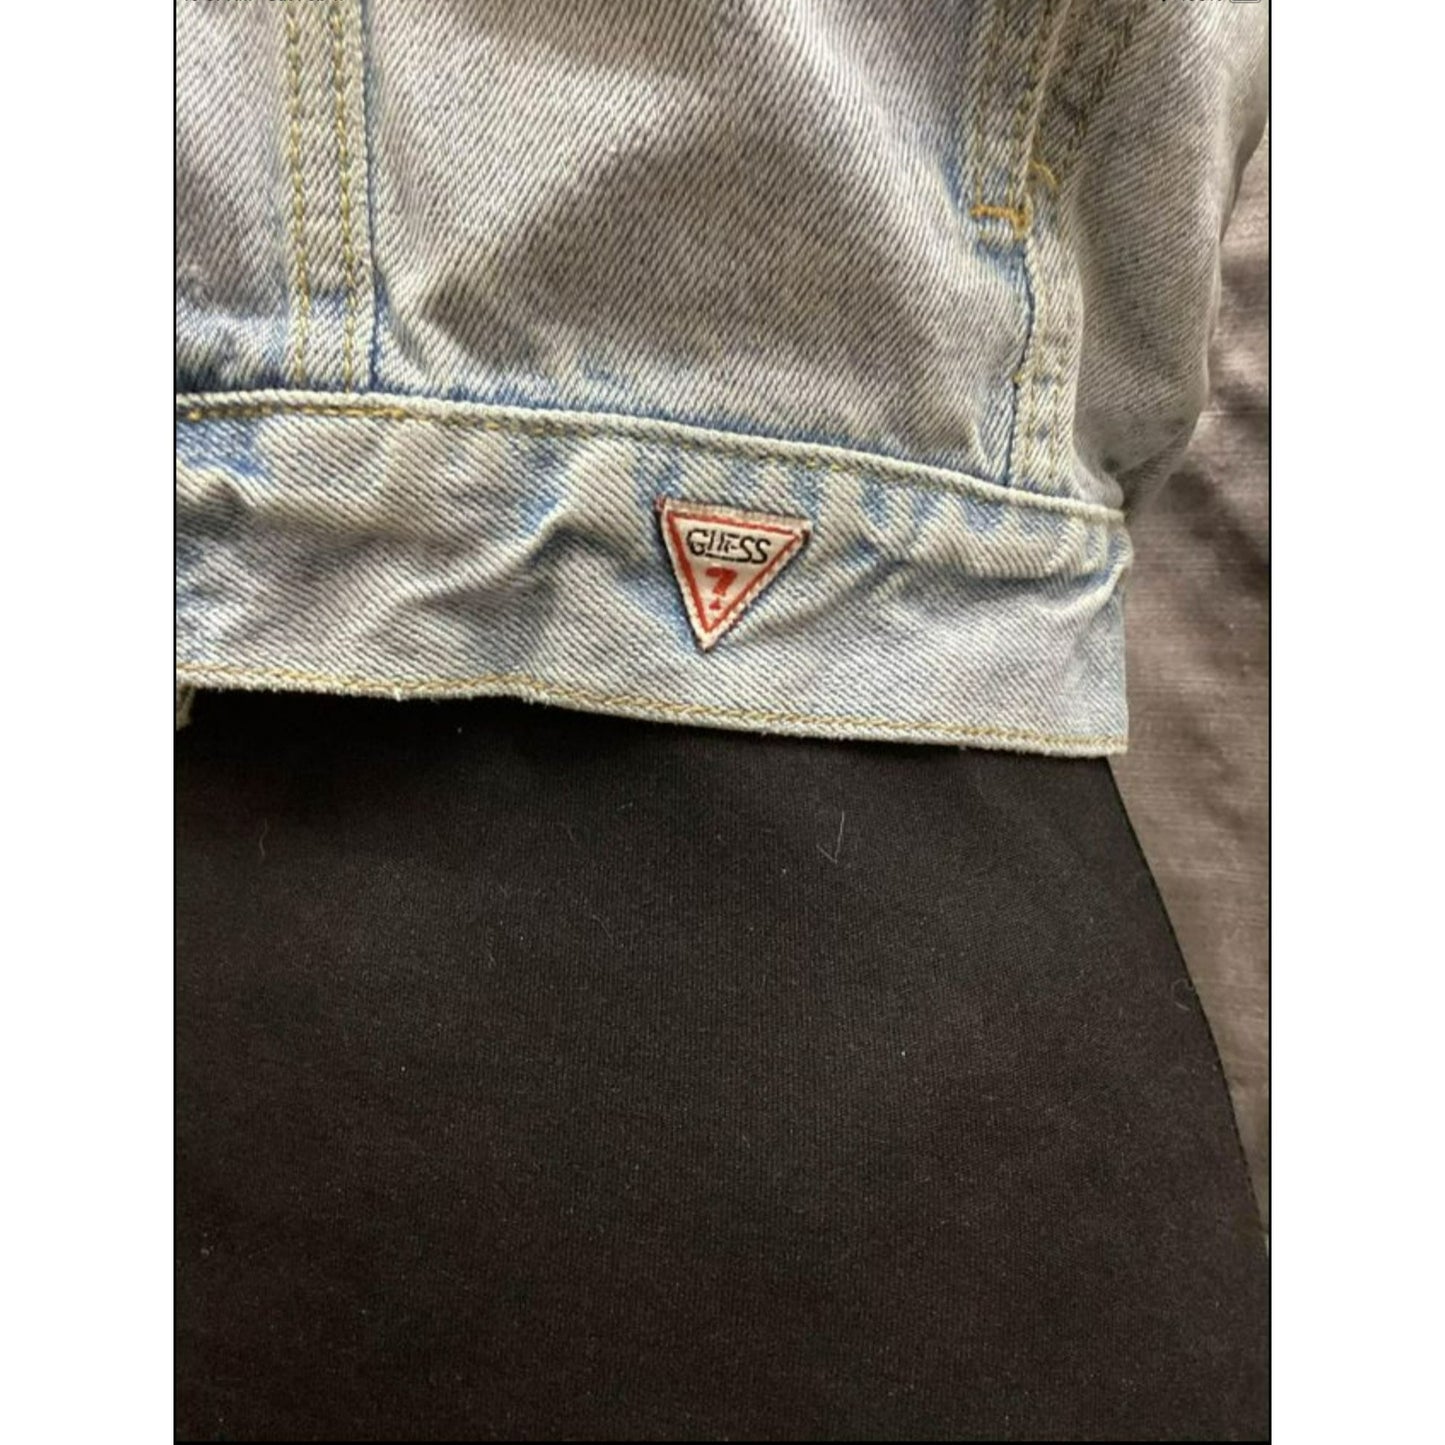 Baby Girl Guess Jean Jacket